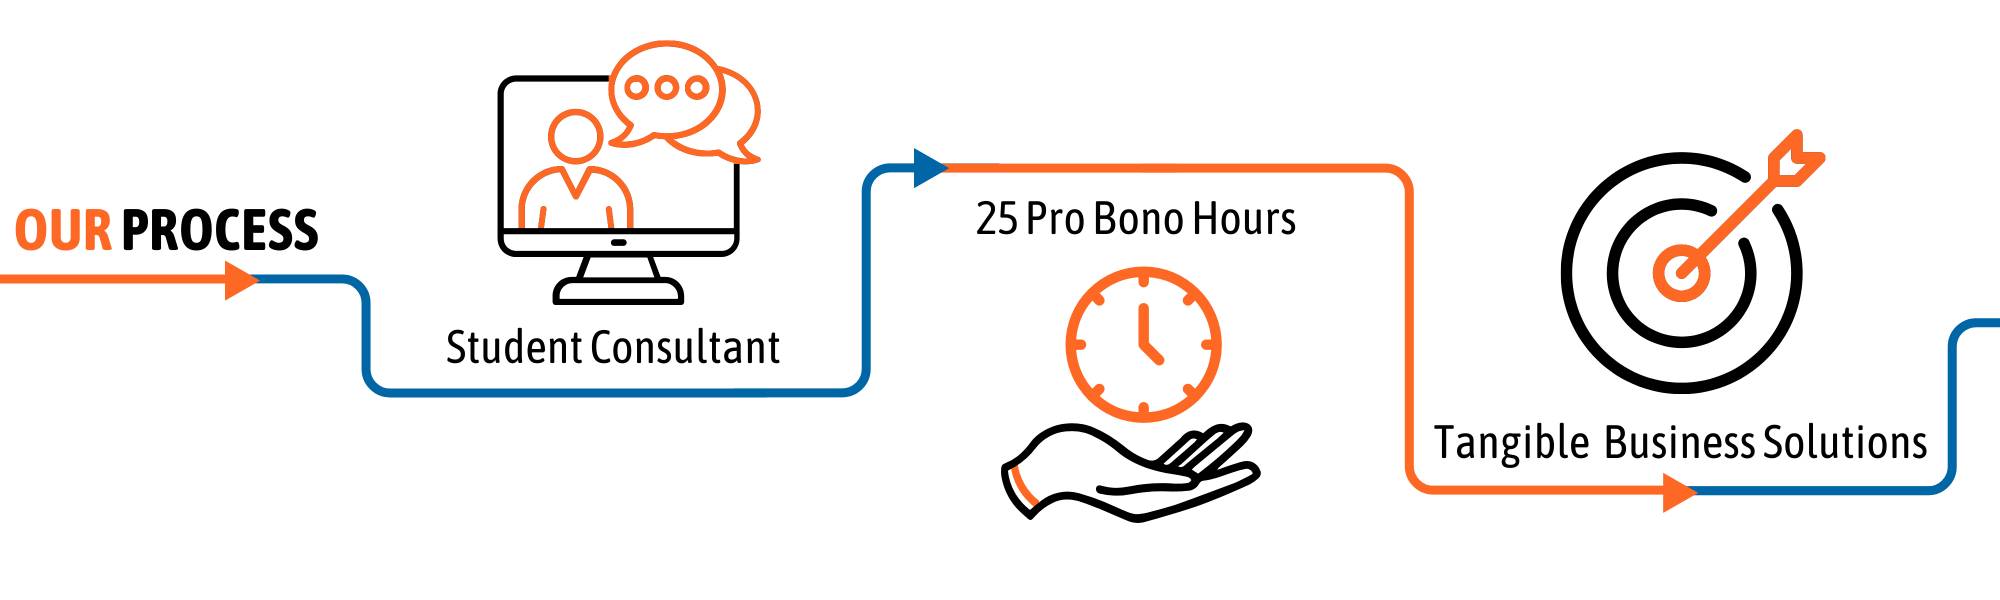 Our process: student consultant, 25 pro bono hours, and tangible business solutions.